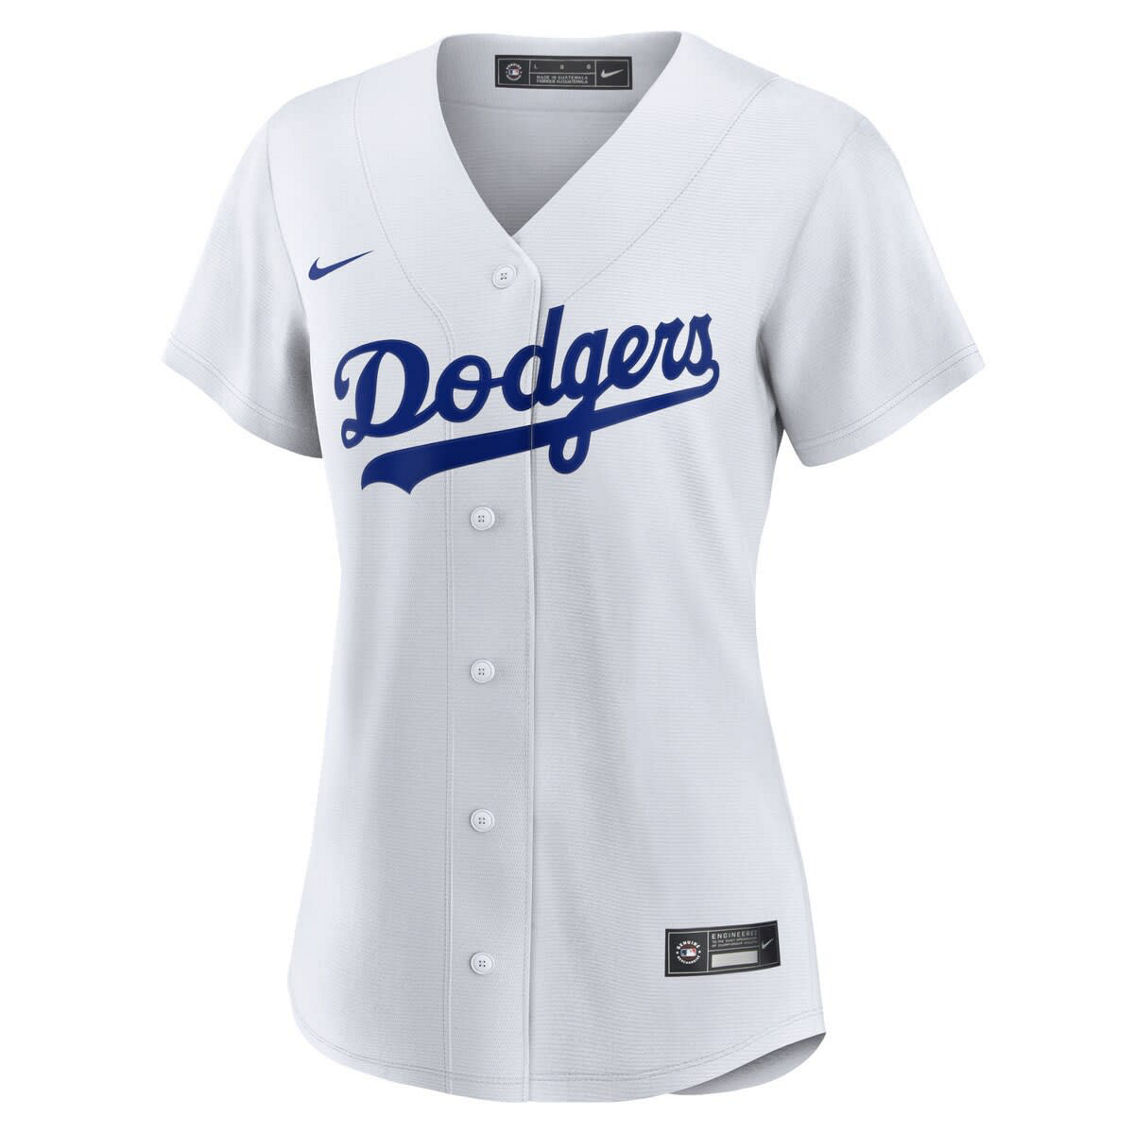 Nike Women's White Los Angeles Dodgers Home Replica Team Jersey - Image 3 of 4